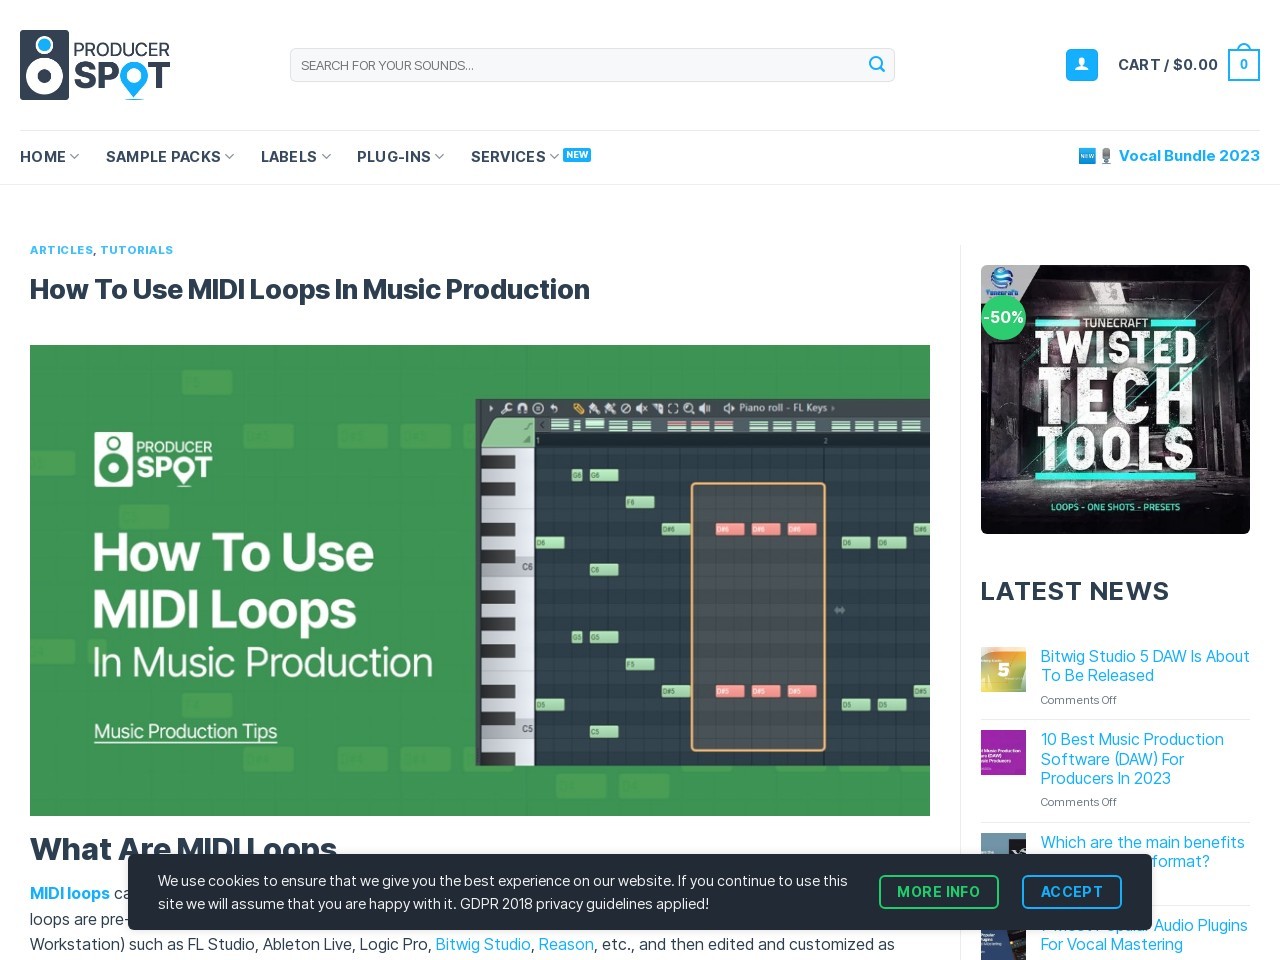 How To Use MIDI Loops In Music Production - Producer Spot